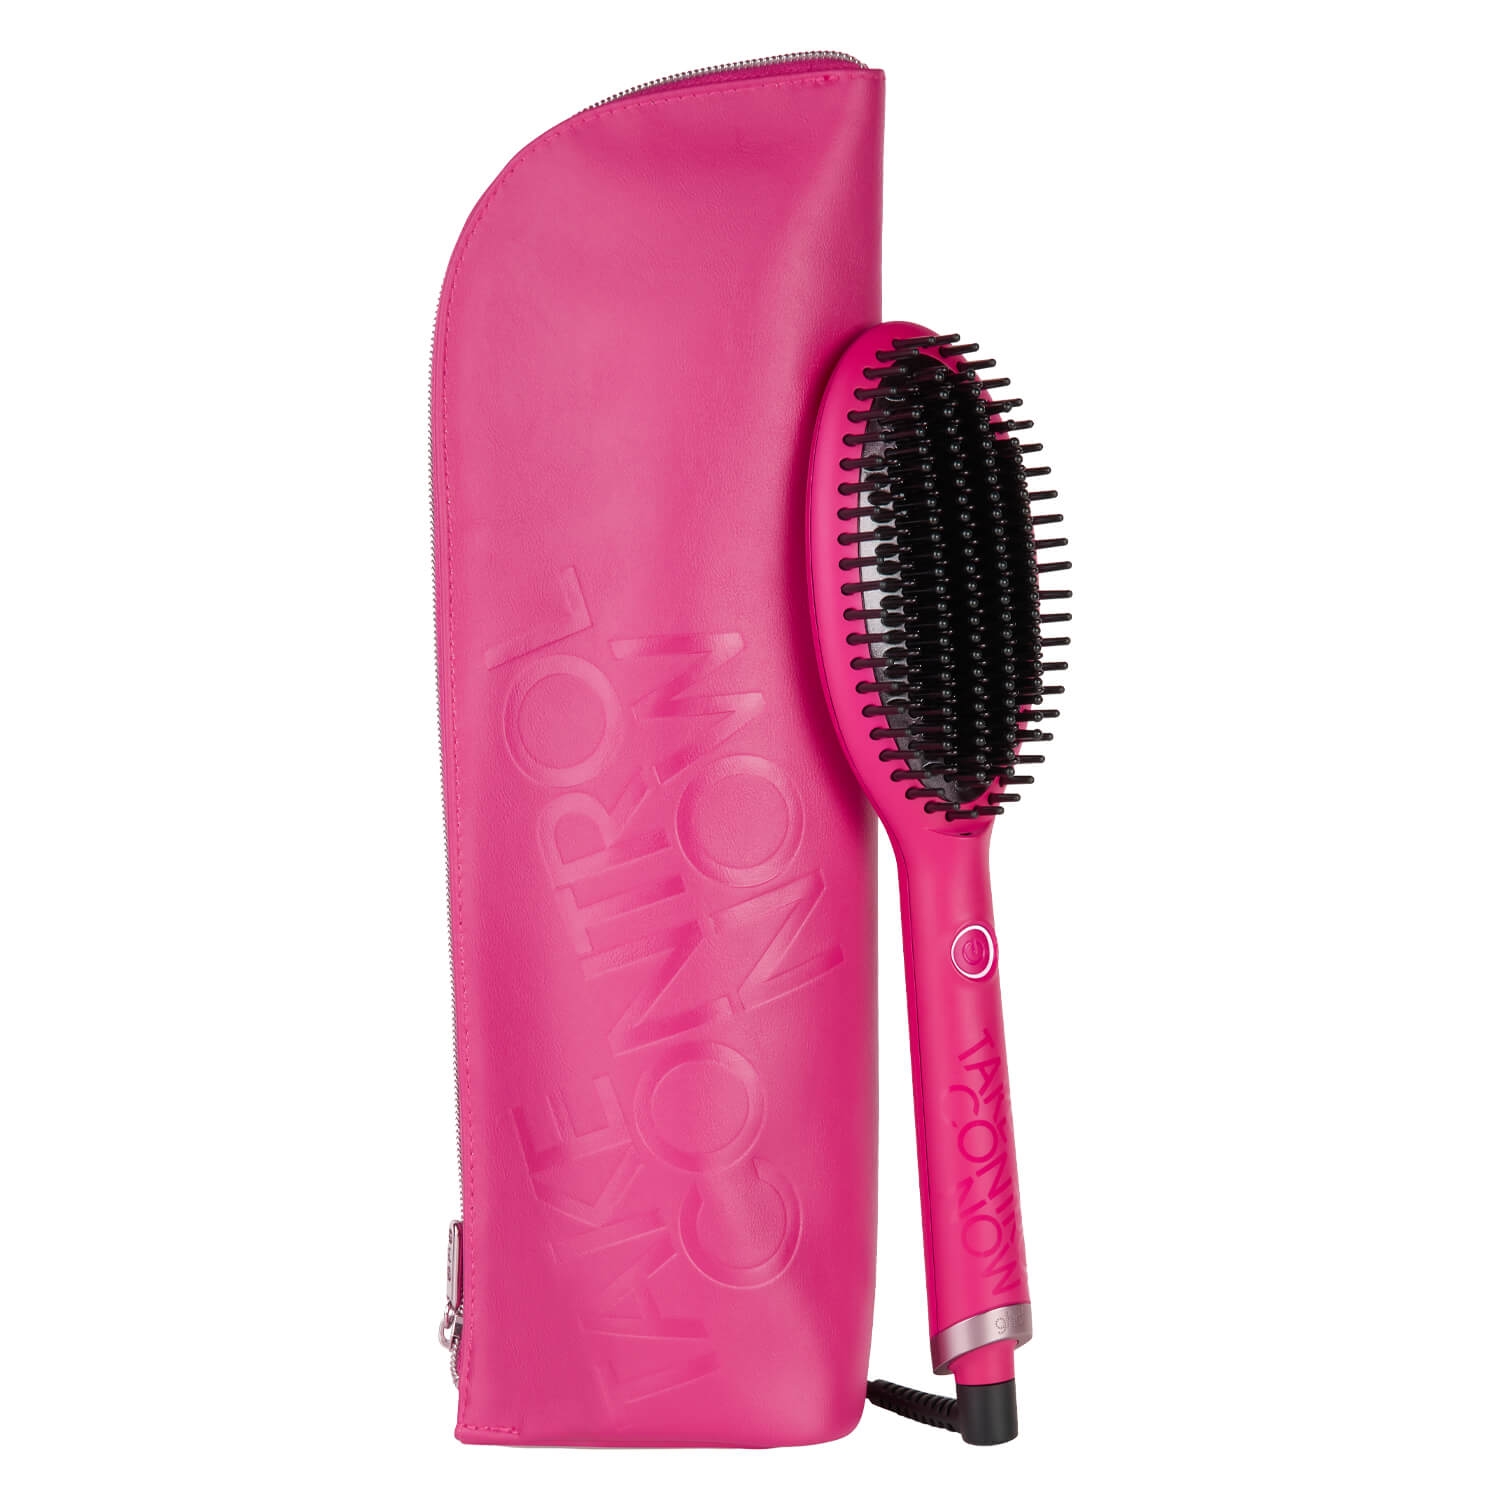 Product image from Take Control Now Glide Hot Brush Pink